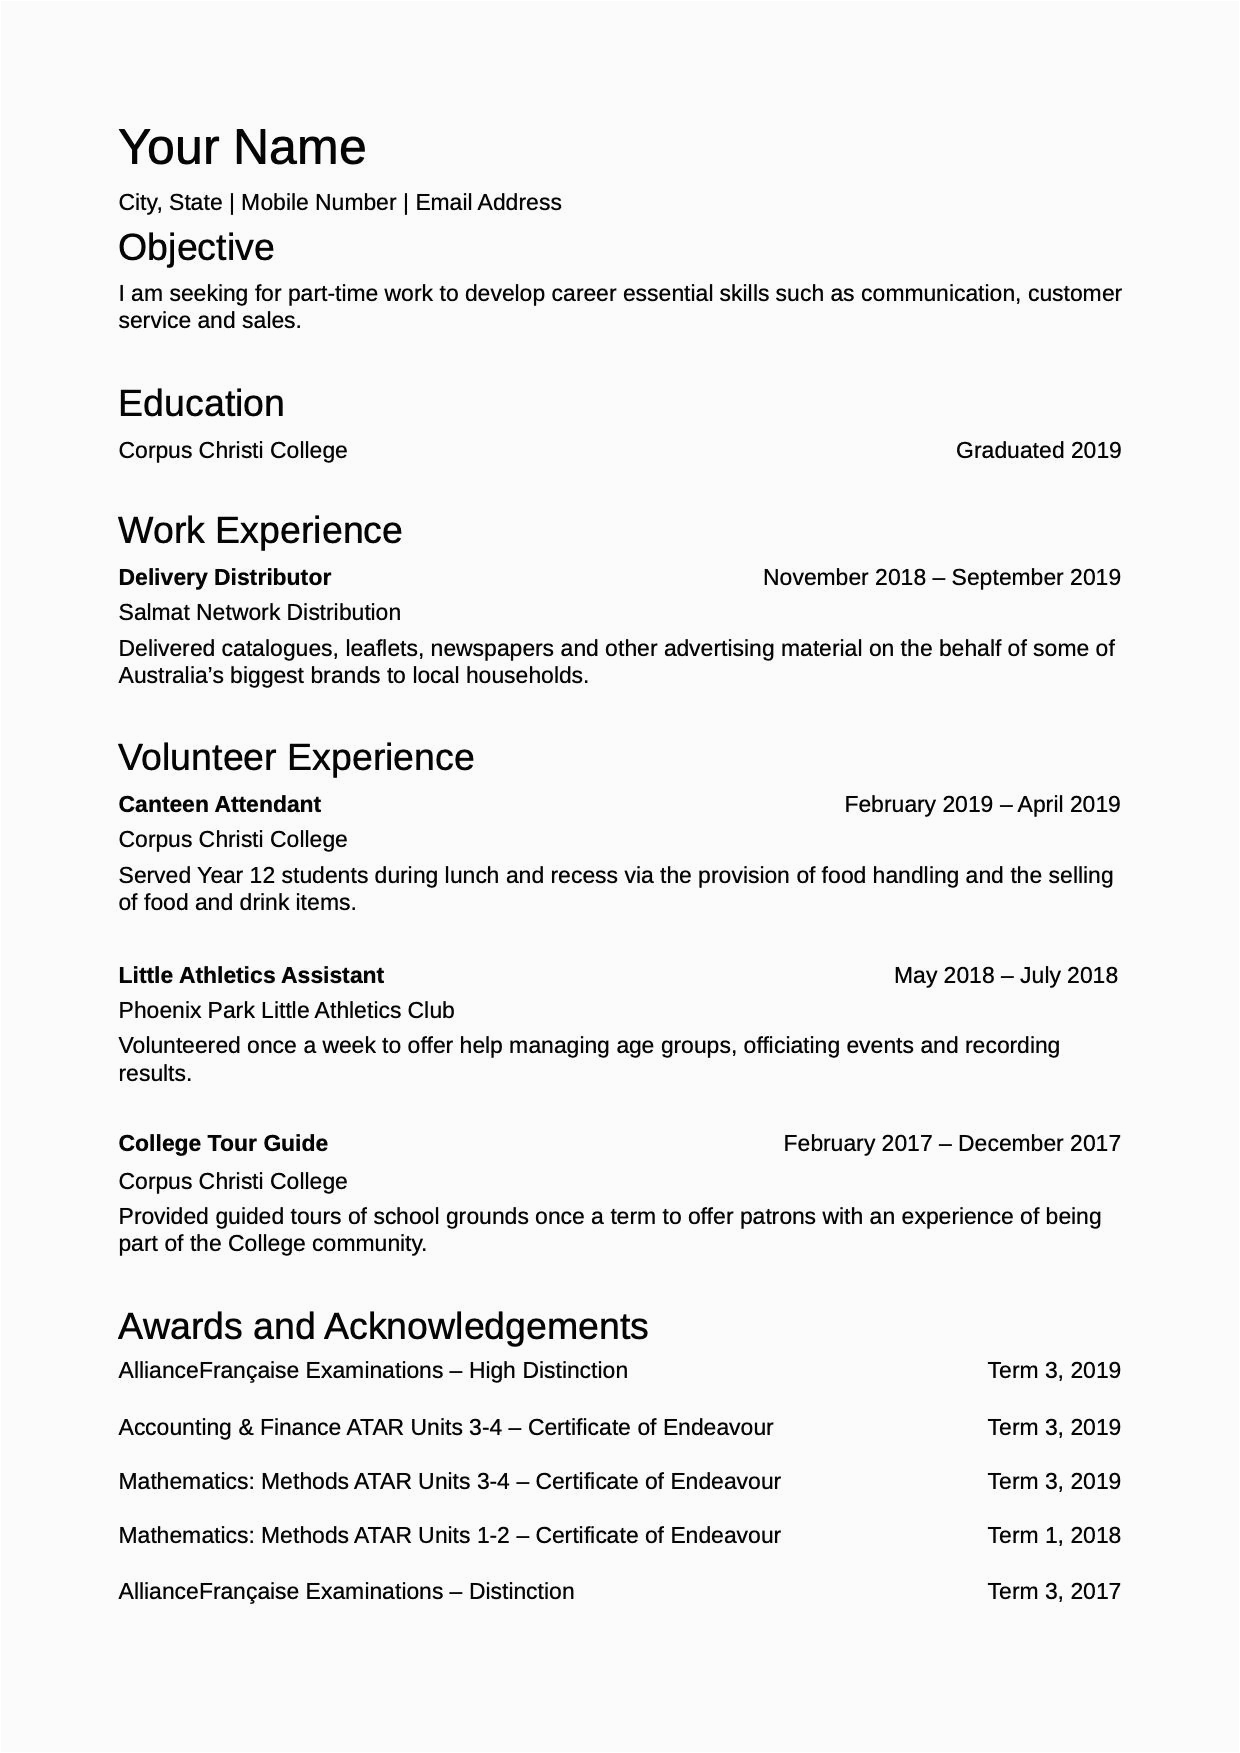 Resume Samples for Students with Little Experience High School Student with Little Work Experience Update Resumes